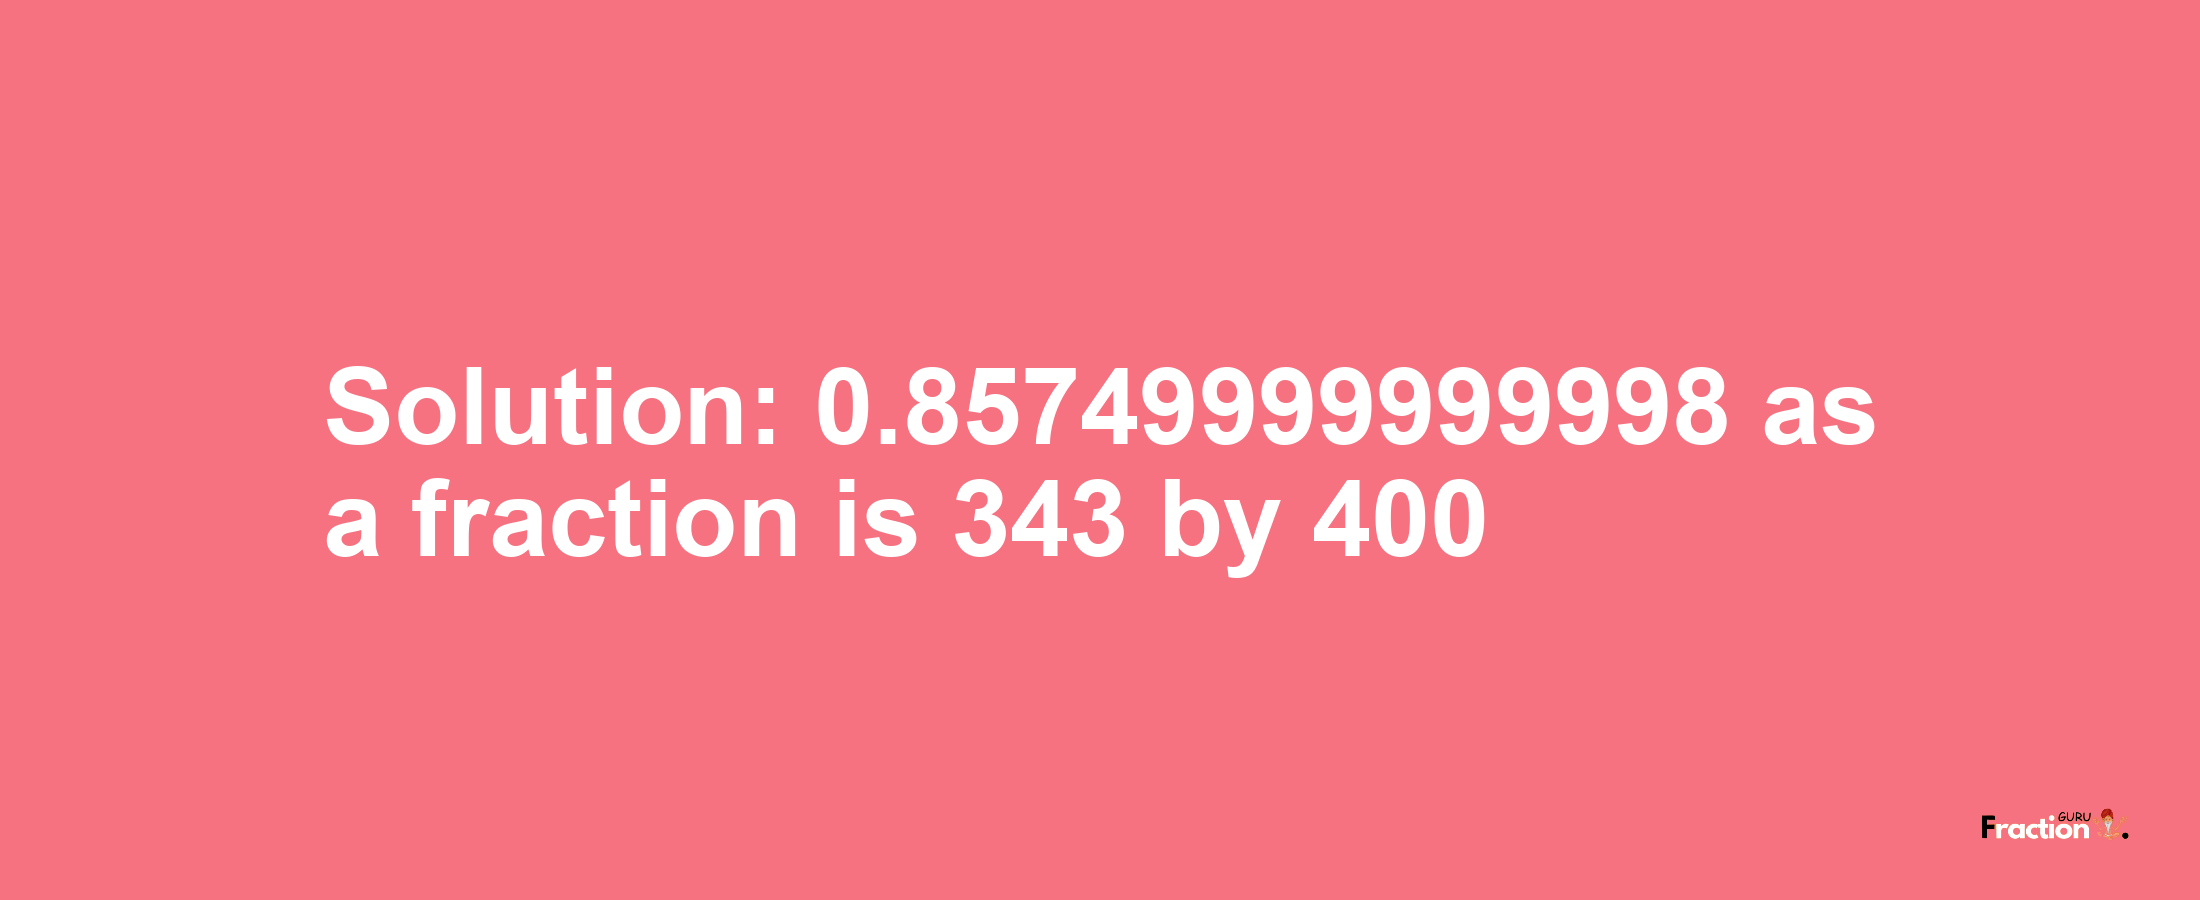 Solution:0.85749999999998 as a fraction is 343/400